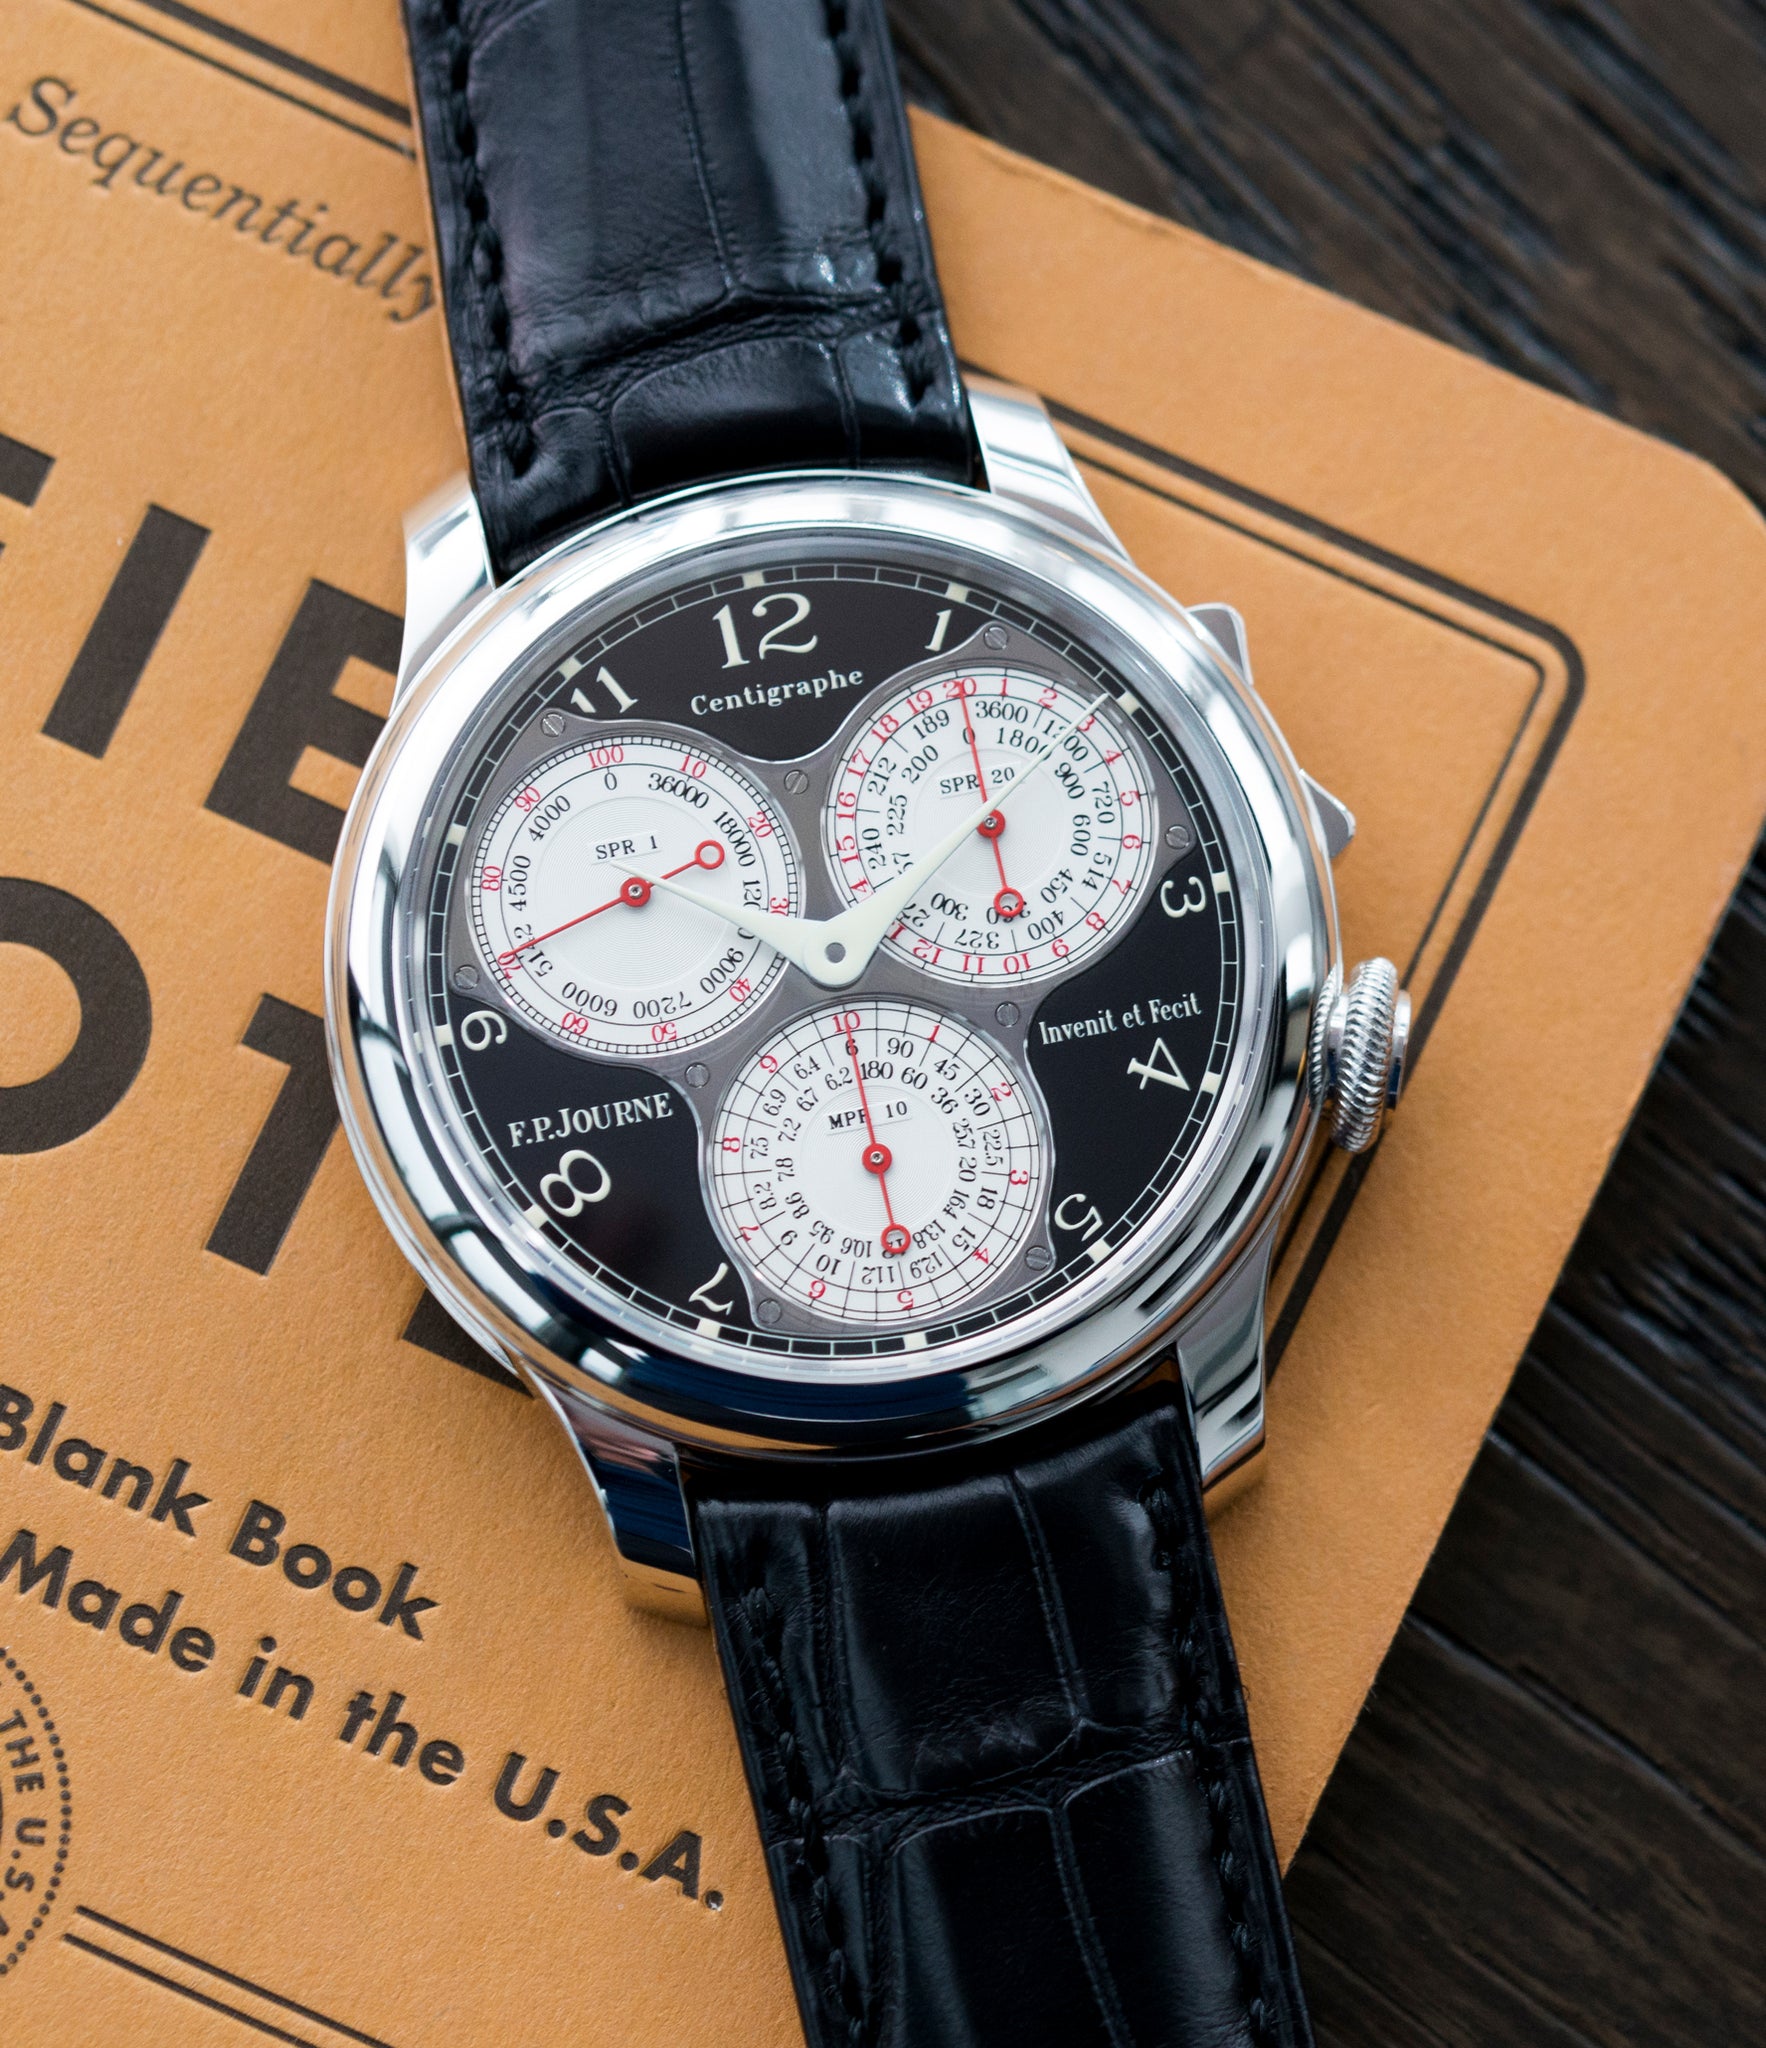 buying F. P. Journe Centigraphe Souverain Black Label 40 mm platinum pre-owned rare watch for sale online at A Collected Man London approved retailer of independent watchmakers